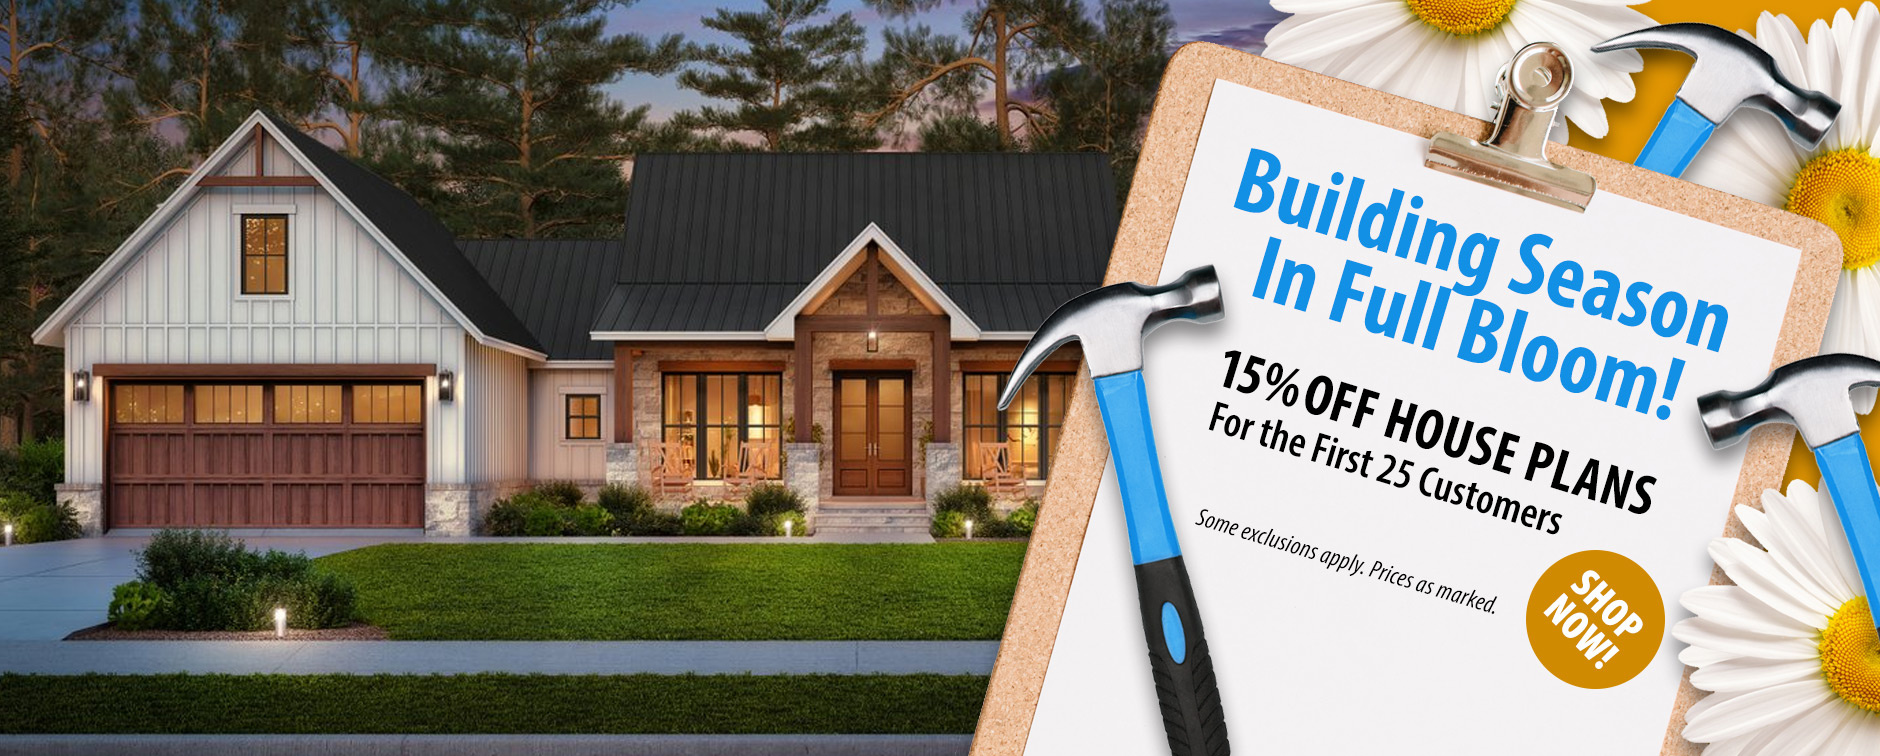 Building Season in Full Bloom: Take 15% Off House Plans - First 25 Customers